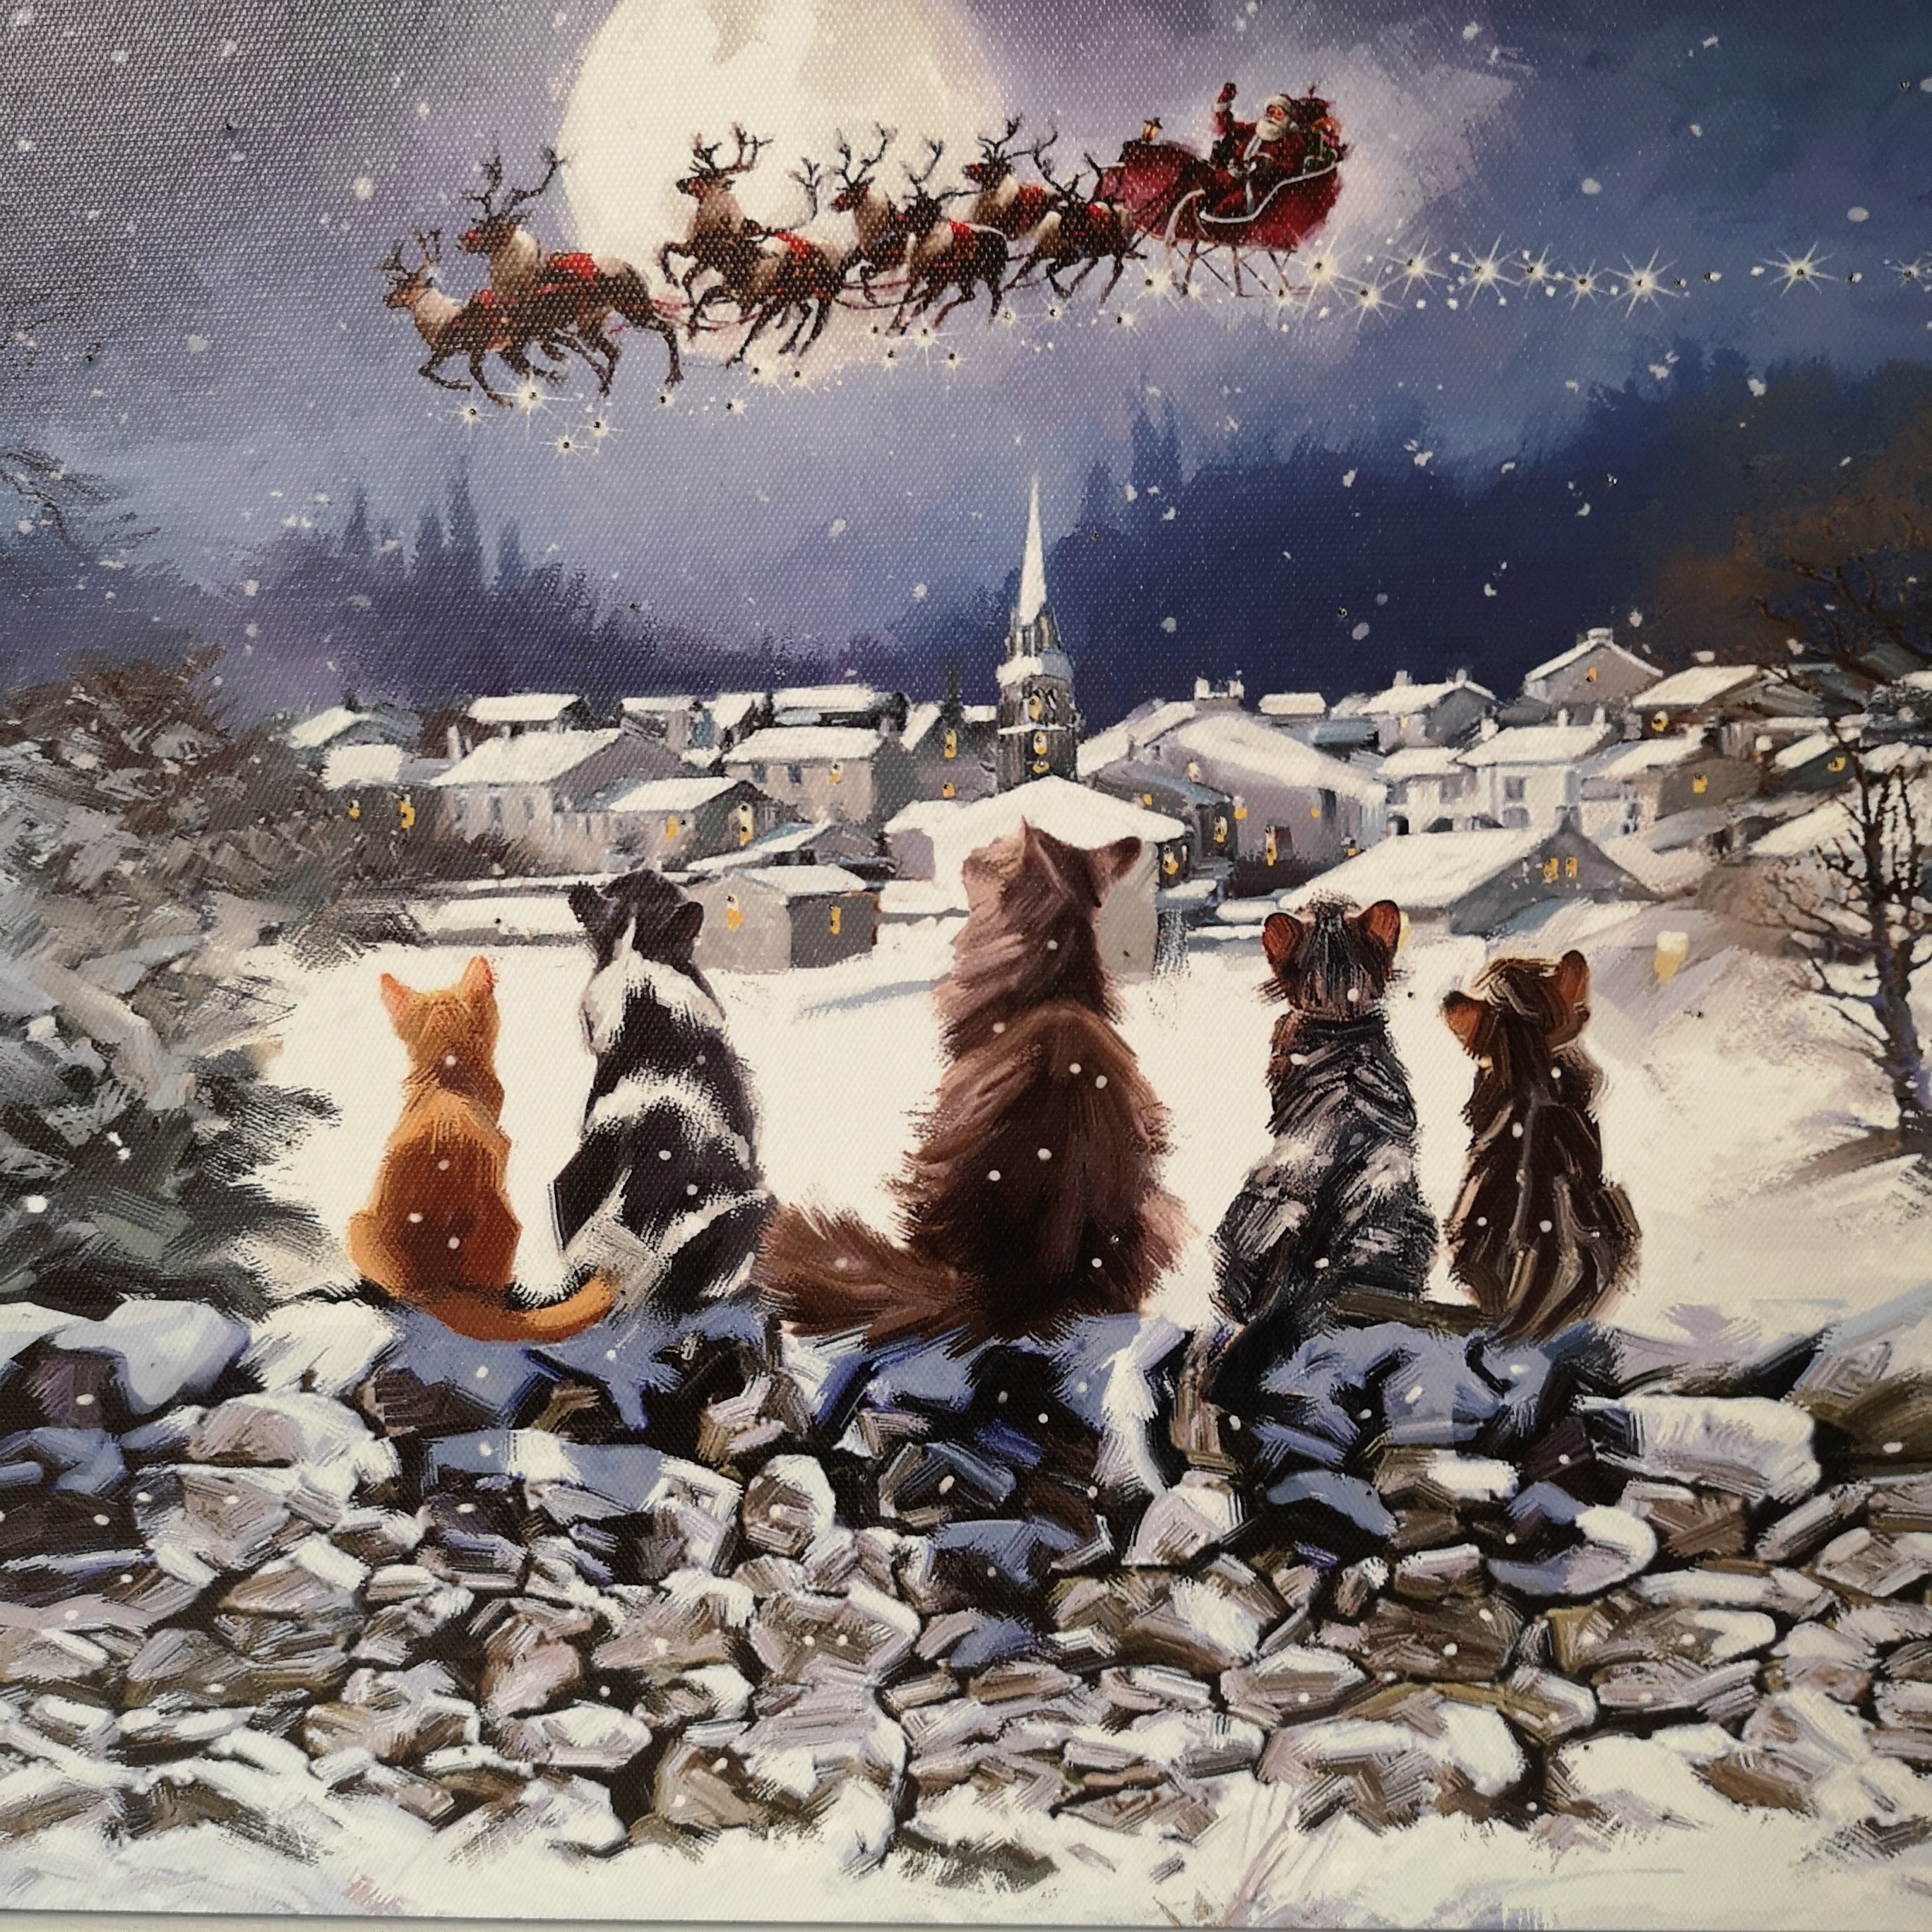 40cm x 30cm Snowtime Touch Operated Cats Christmas Fibre Optic Wall Canvas